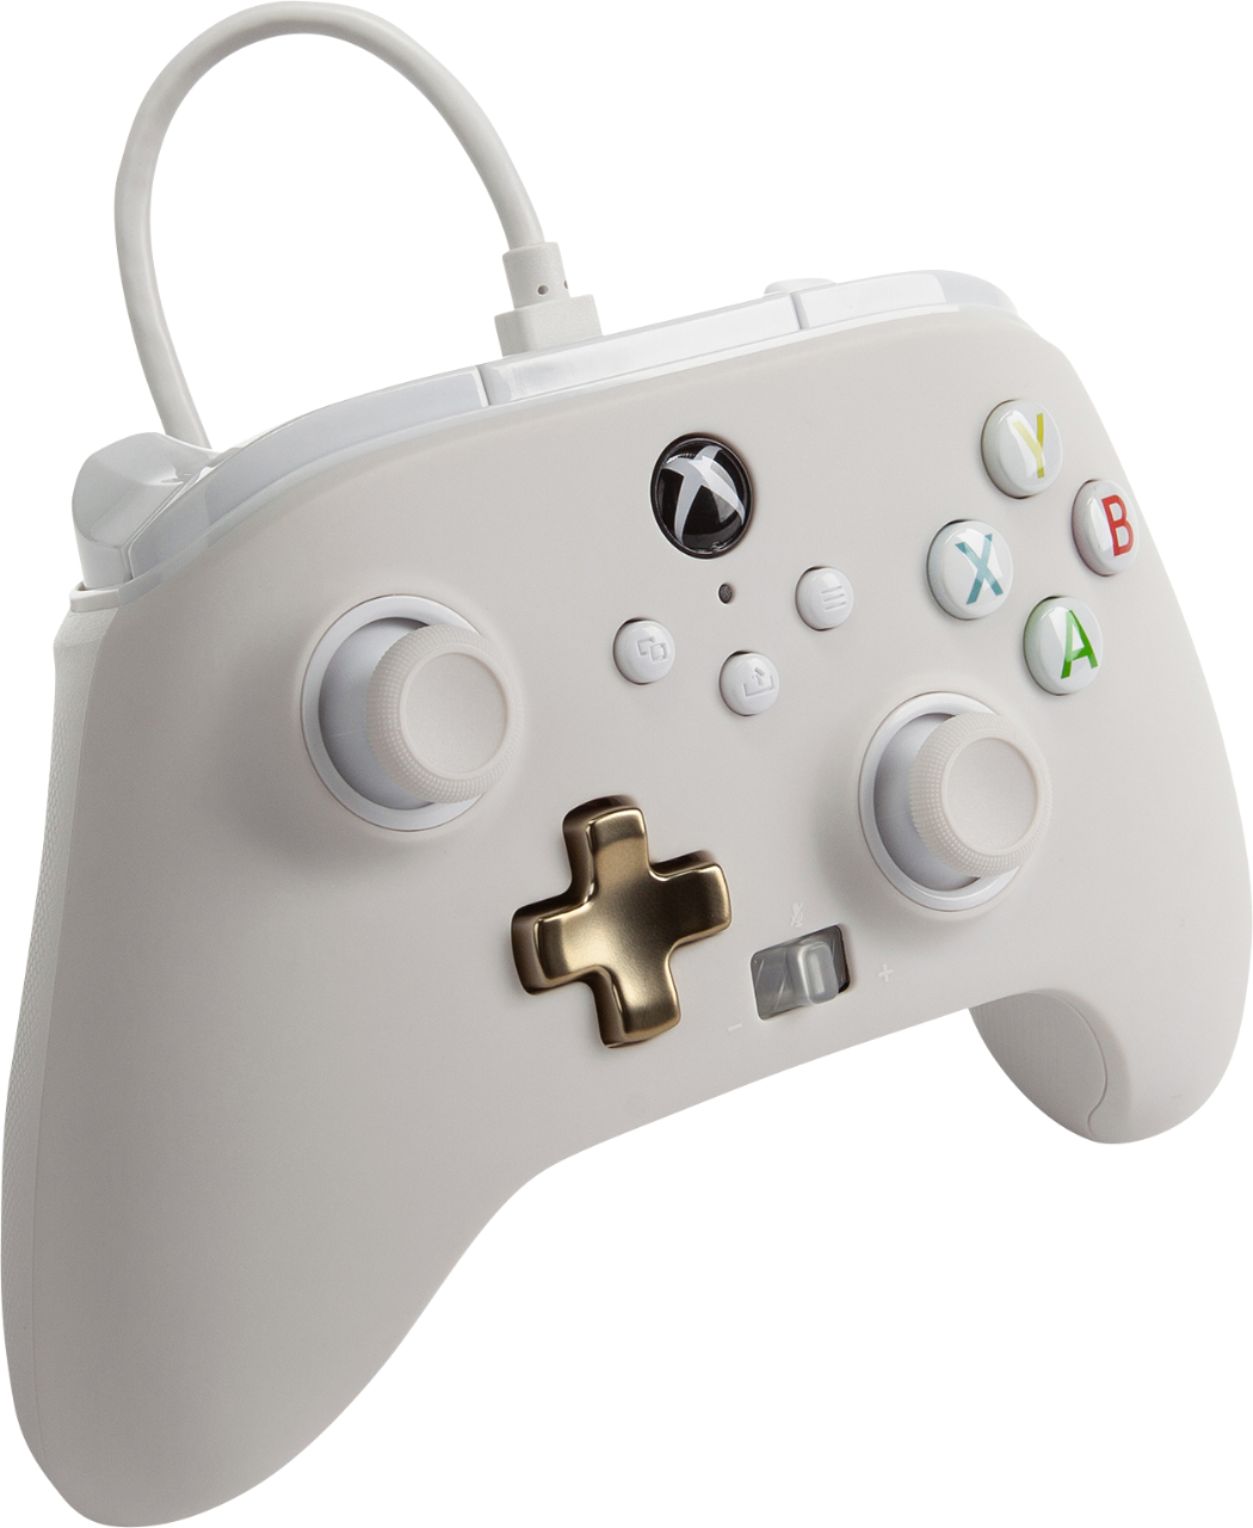 Angle View: PowerA Enhanced Wired Controller for Xbox Series X|S - Mist